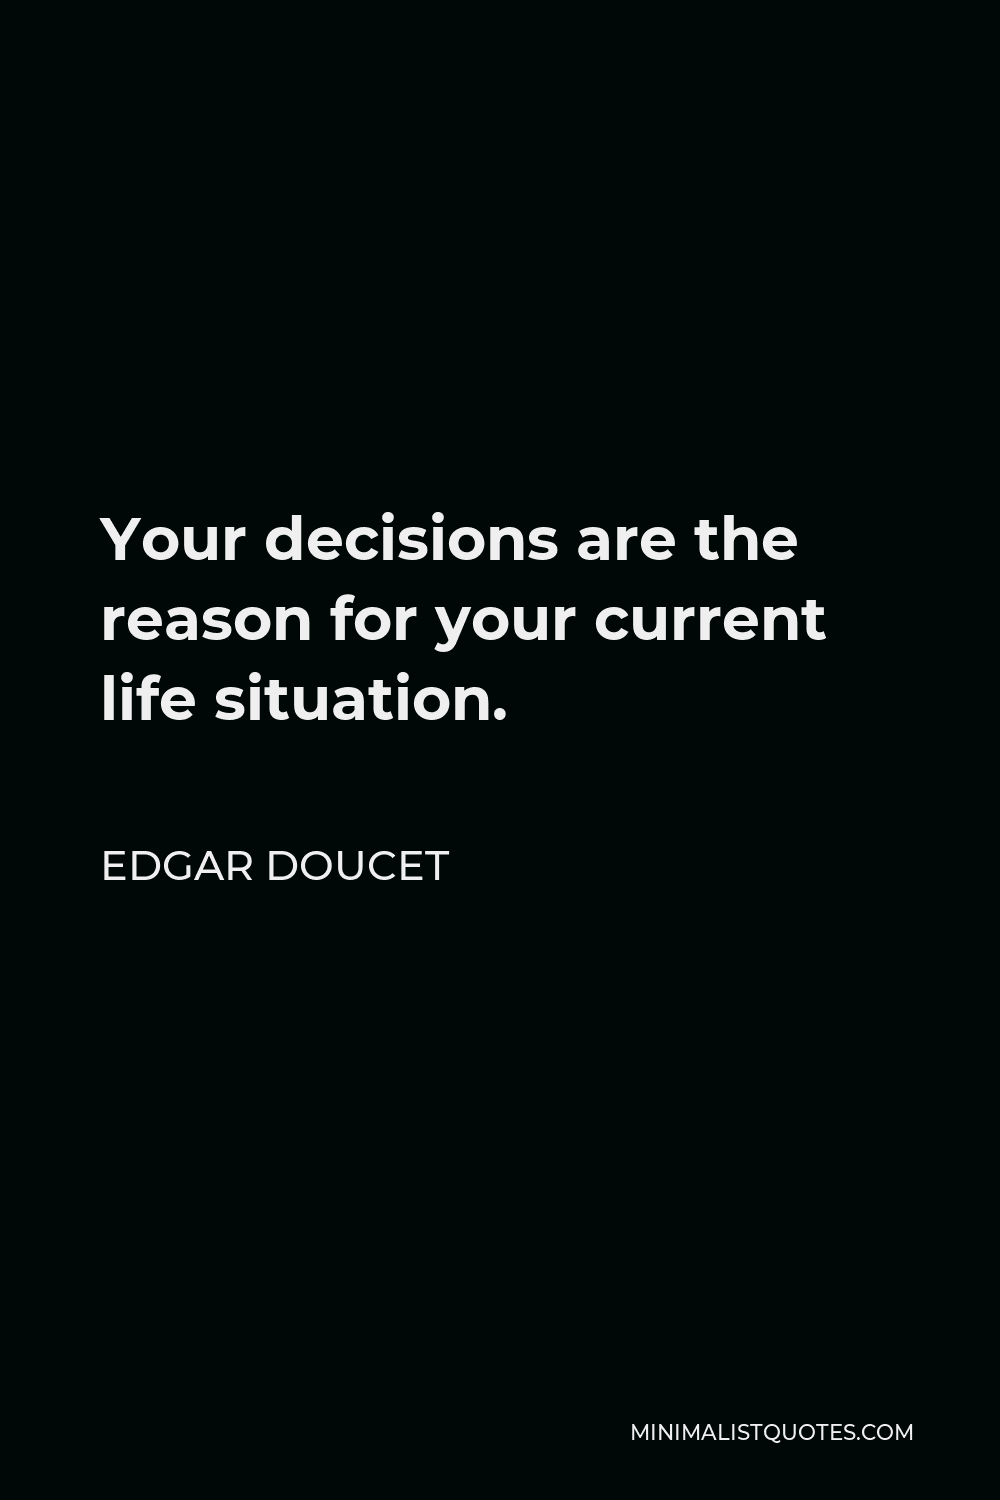 Edgar Doucet Quote - Your decisions are the reason for your current life situation.